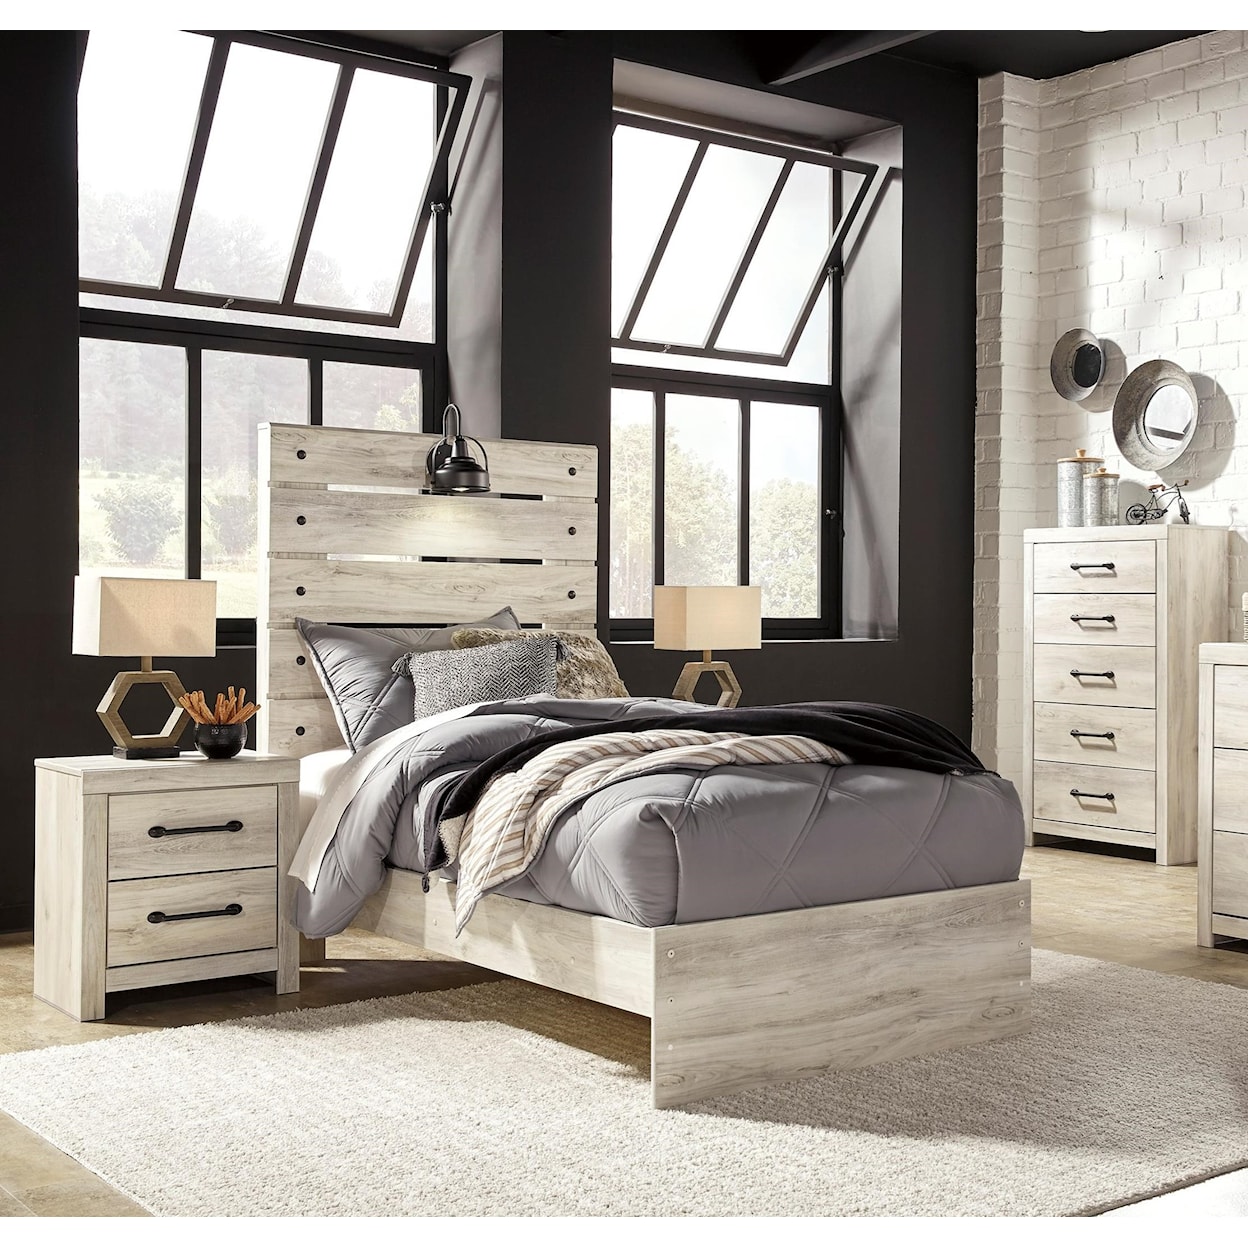 Signature Design by Ashley Furniture Cambeck Twin Bedroom Group